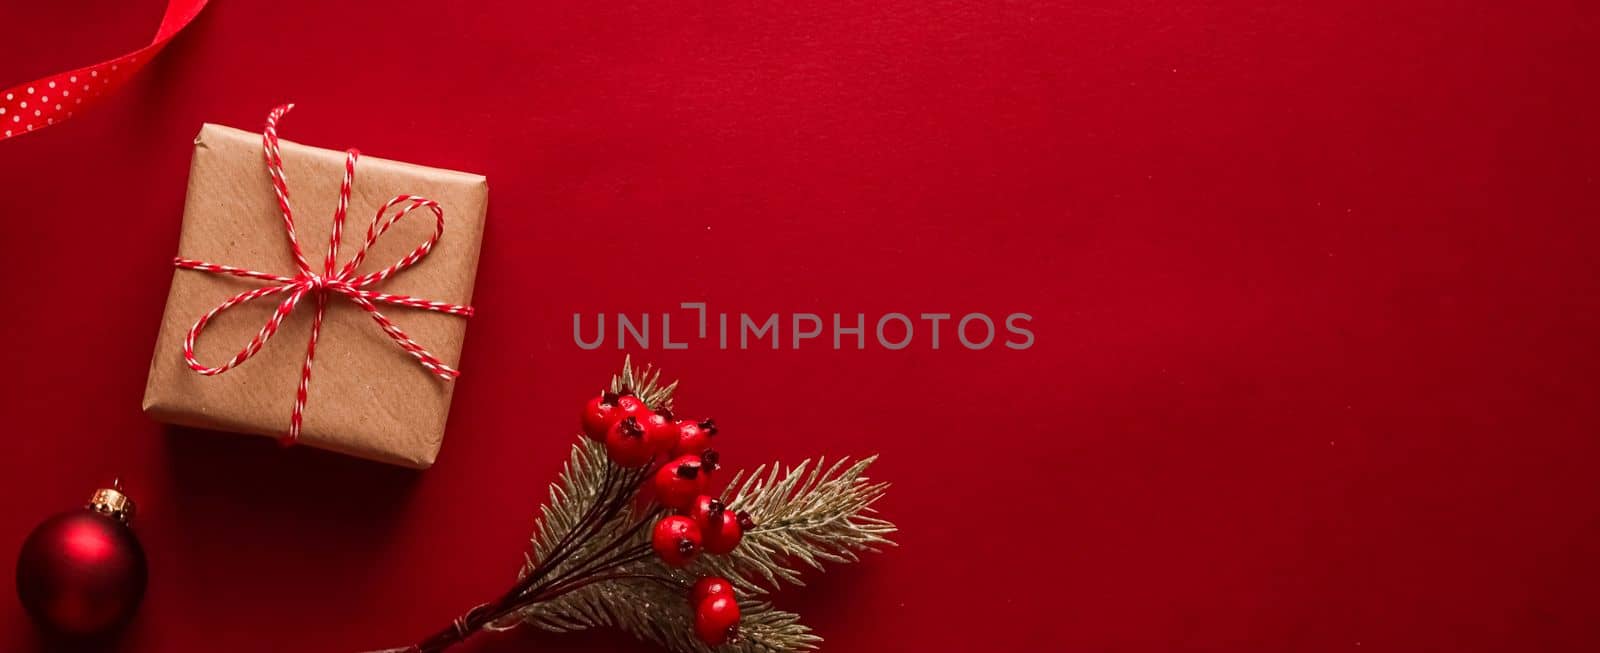 Christmas gifts, boxing day and traditional holiday presents flat lay, classic xmas gift boxes on red background, wrapped present with festive ornaments and decorations for holidays flatlay design